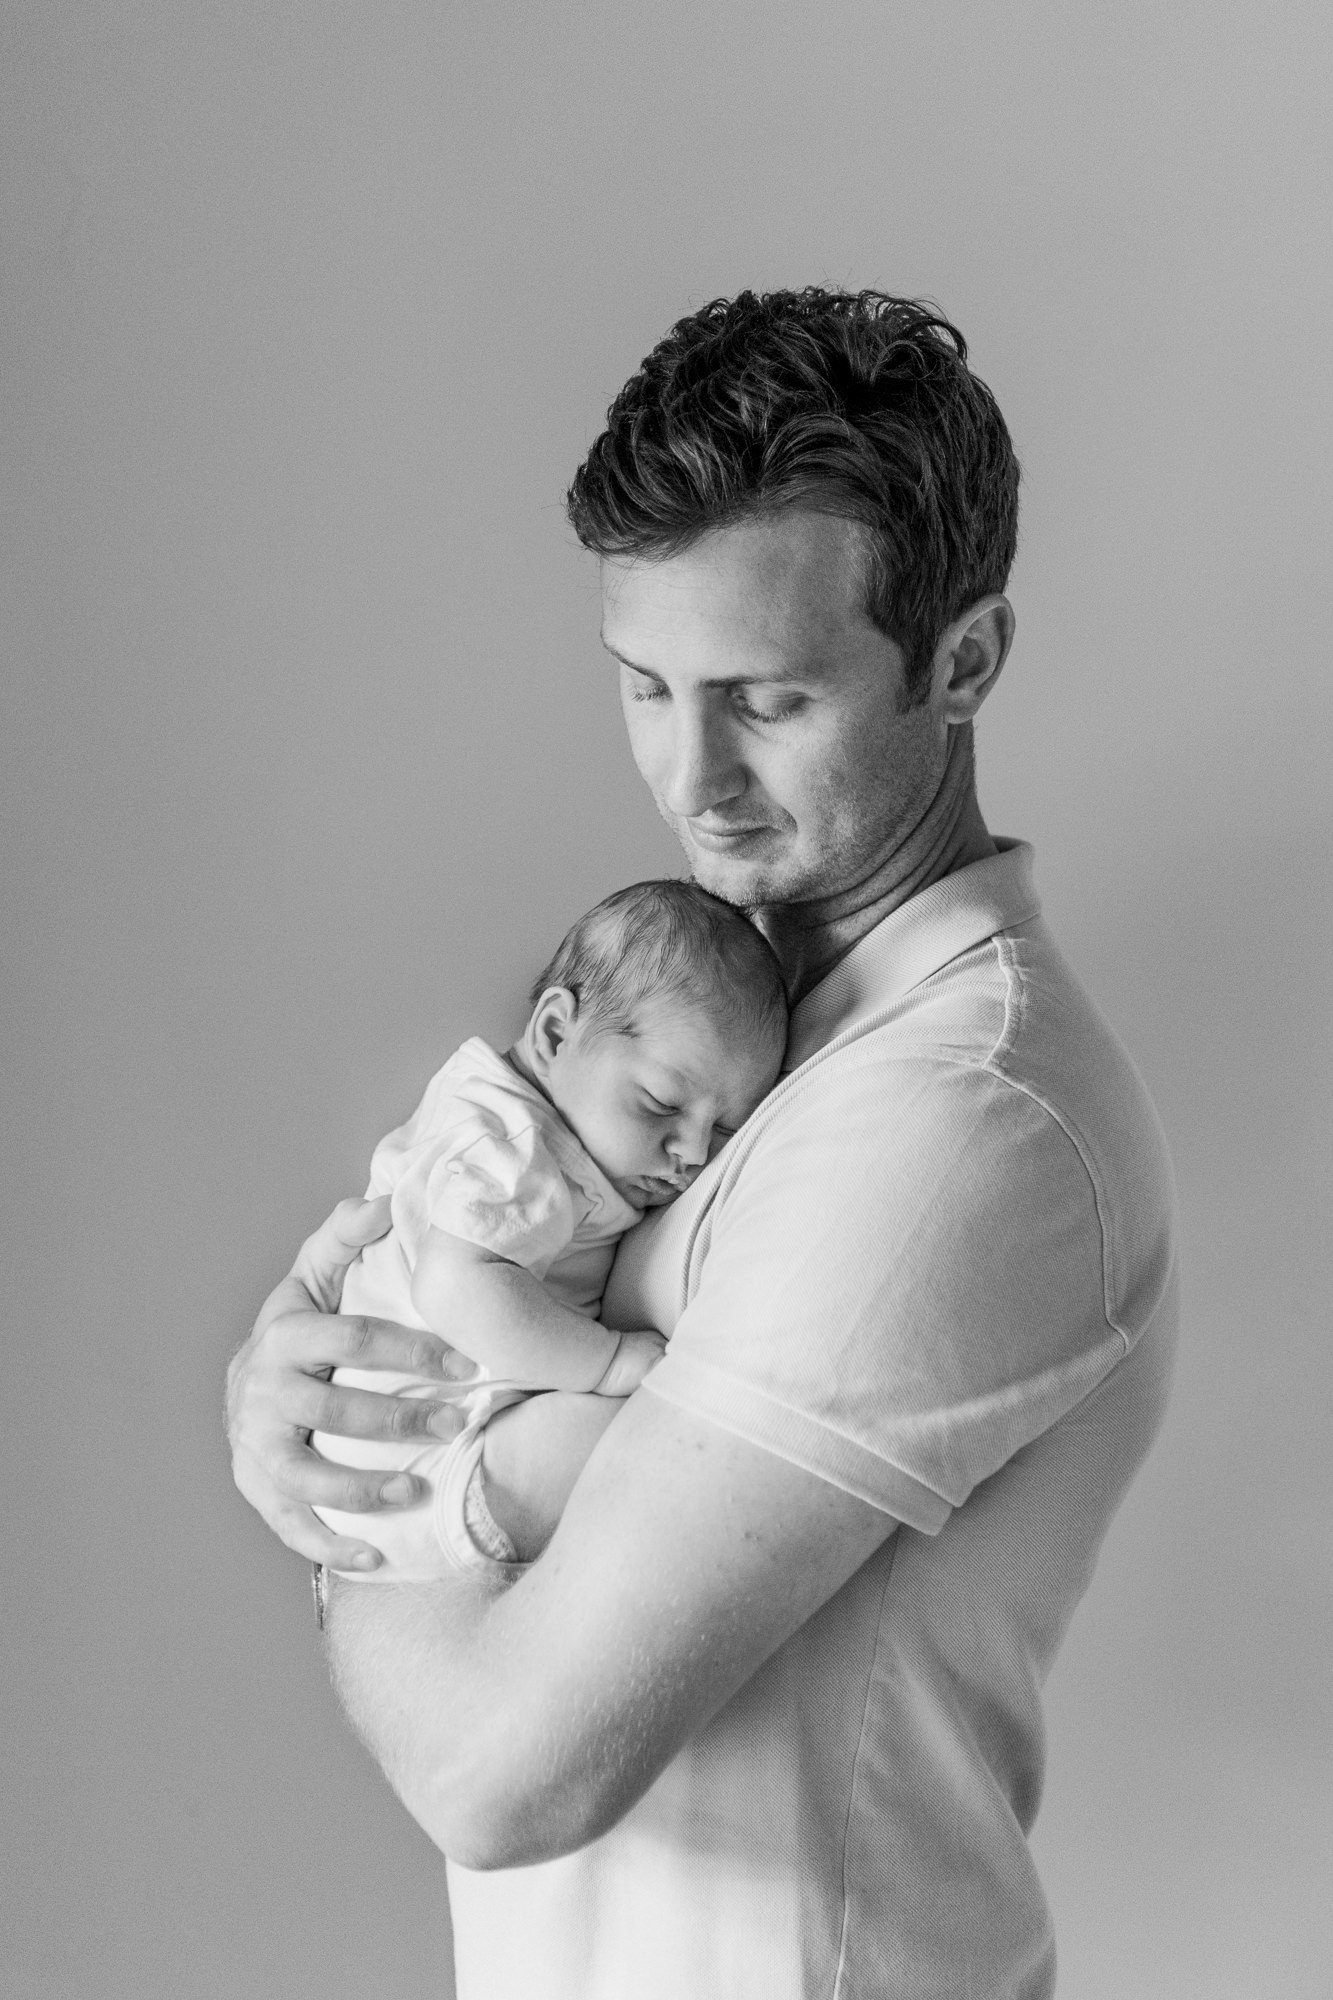  Sweet pose idea for a father and son portrait during an in-home newborn session in Short Hills, New Jersey with Nicole Hawkins Photography. #candidposeinspo #newbornphotography #shorthillsphotographer #familyphotographersinnewjersey #inhomeportraits